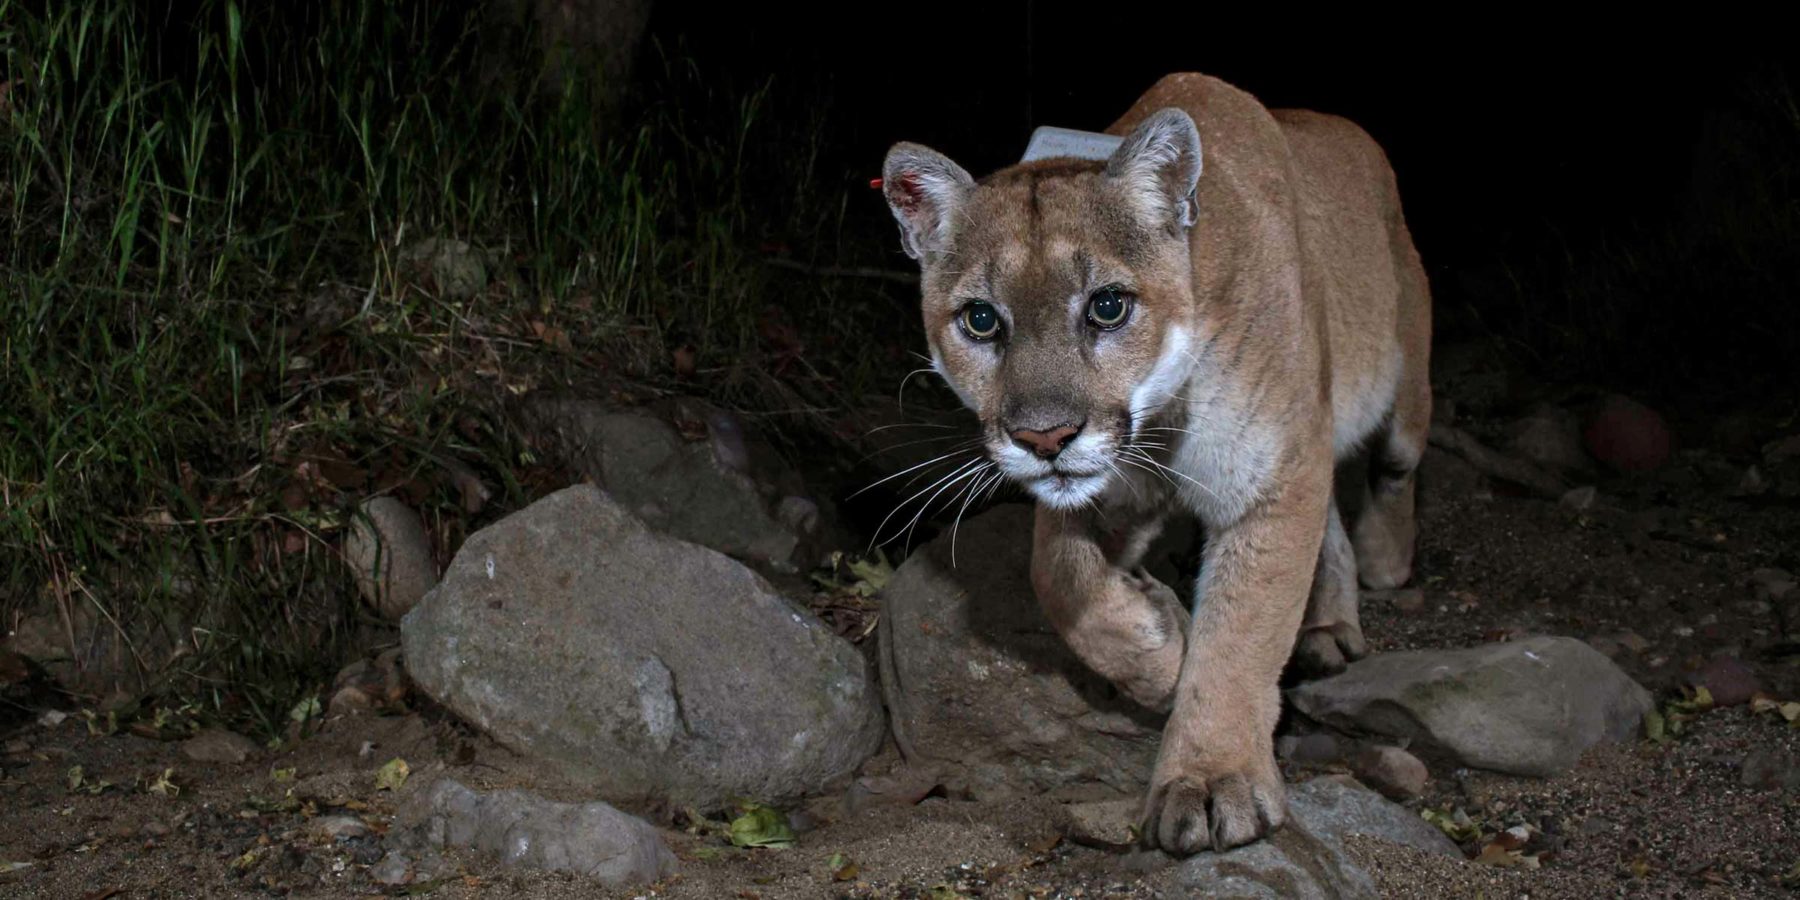 Mountain Lion (P22) prowling at night